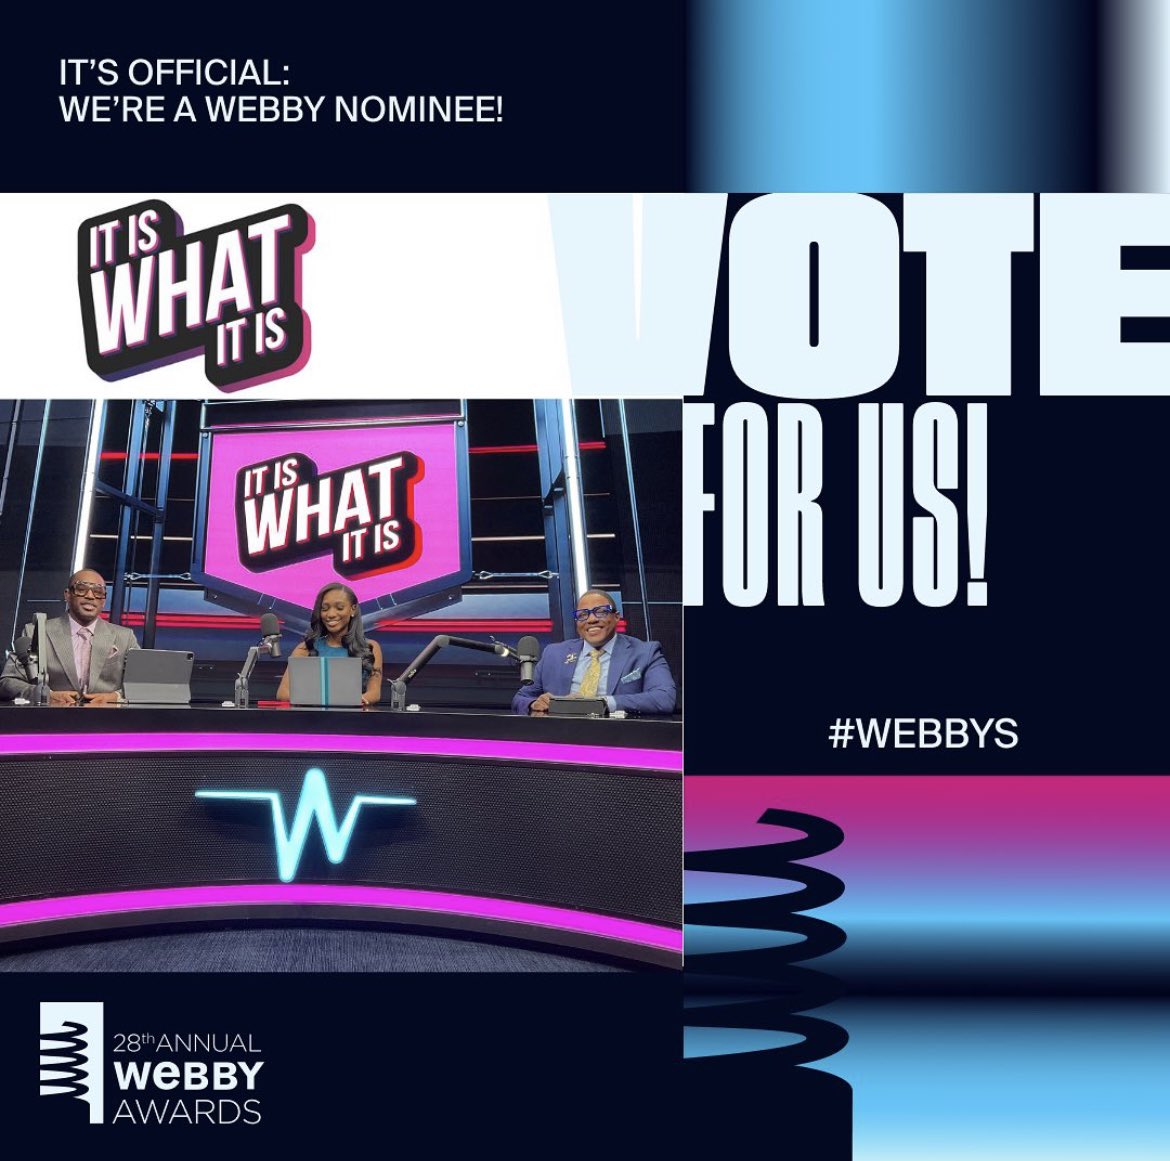 WE GOT OUR FIRST AWARD NOMINEE OF MANY TO COME… WE ARE NOMINATED FOR “THE BEST OF THE INTERNET” & “THE PEOPLES VOICE AWARD” IN THE SPORTS PODCAST CATEGORY… YALL GO RUN THOSE VOTES UP @ vote.WEBBYAWARDS.com WE APPRECIATE THE LOVE & SUPPORT… @TheWebbyAwards